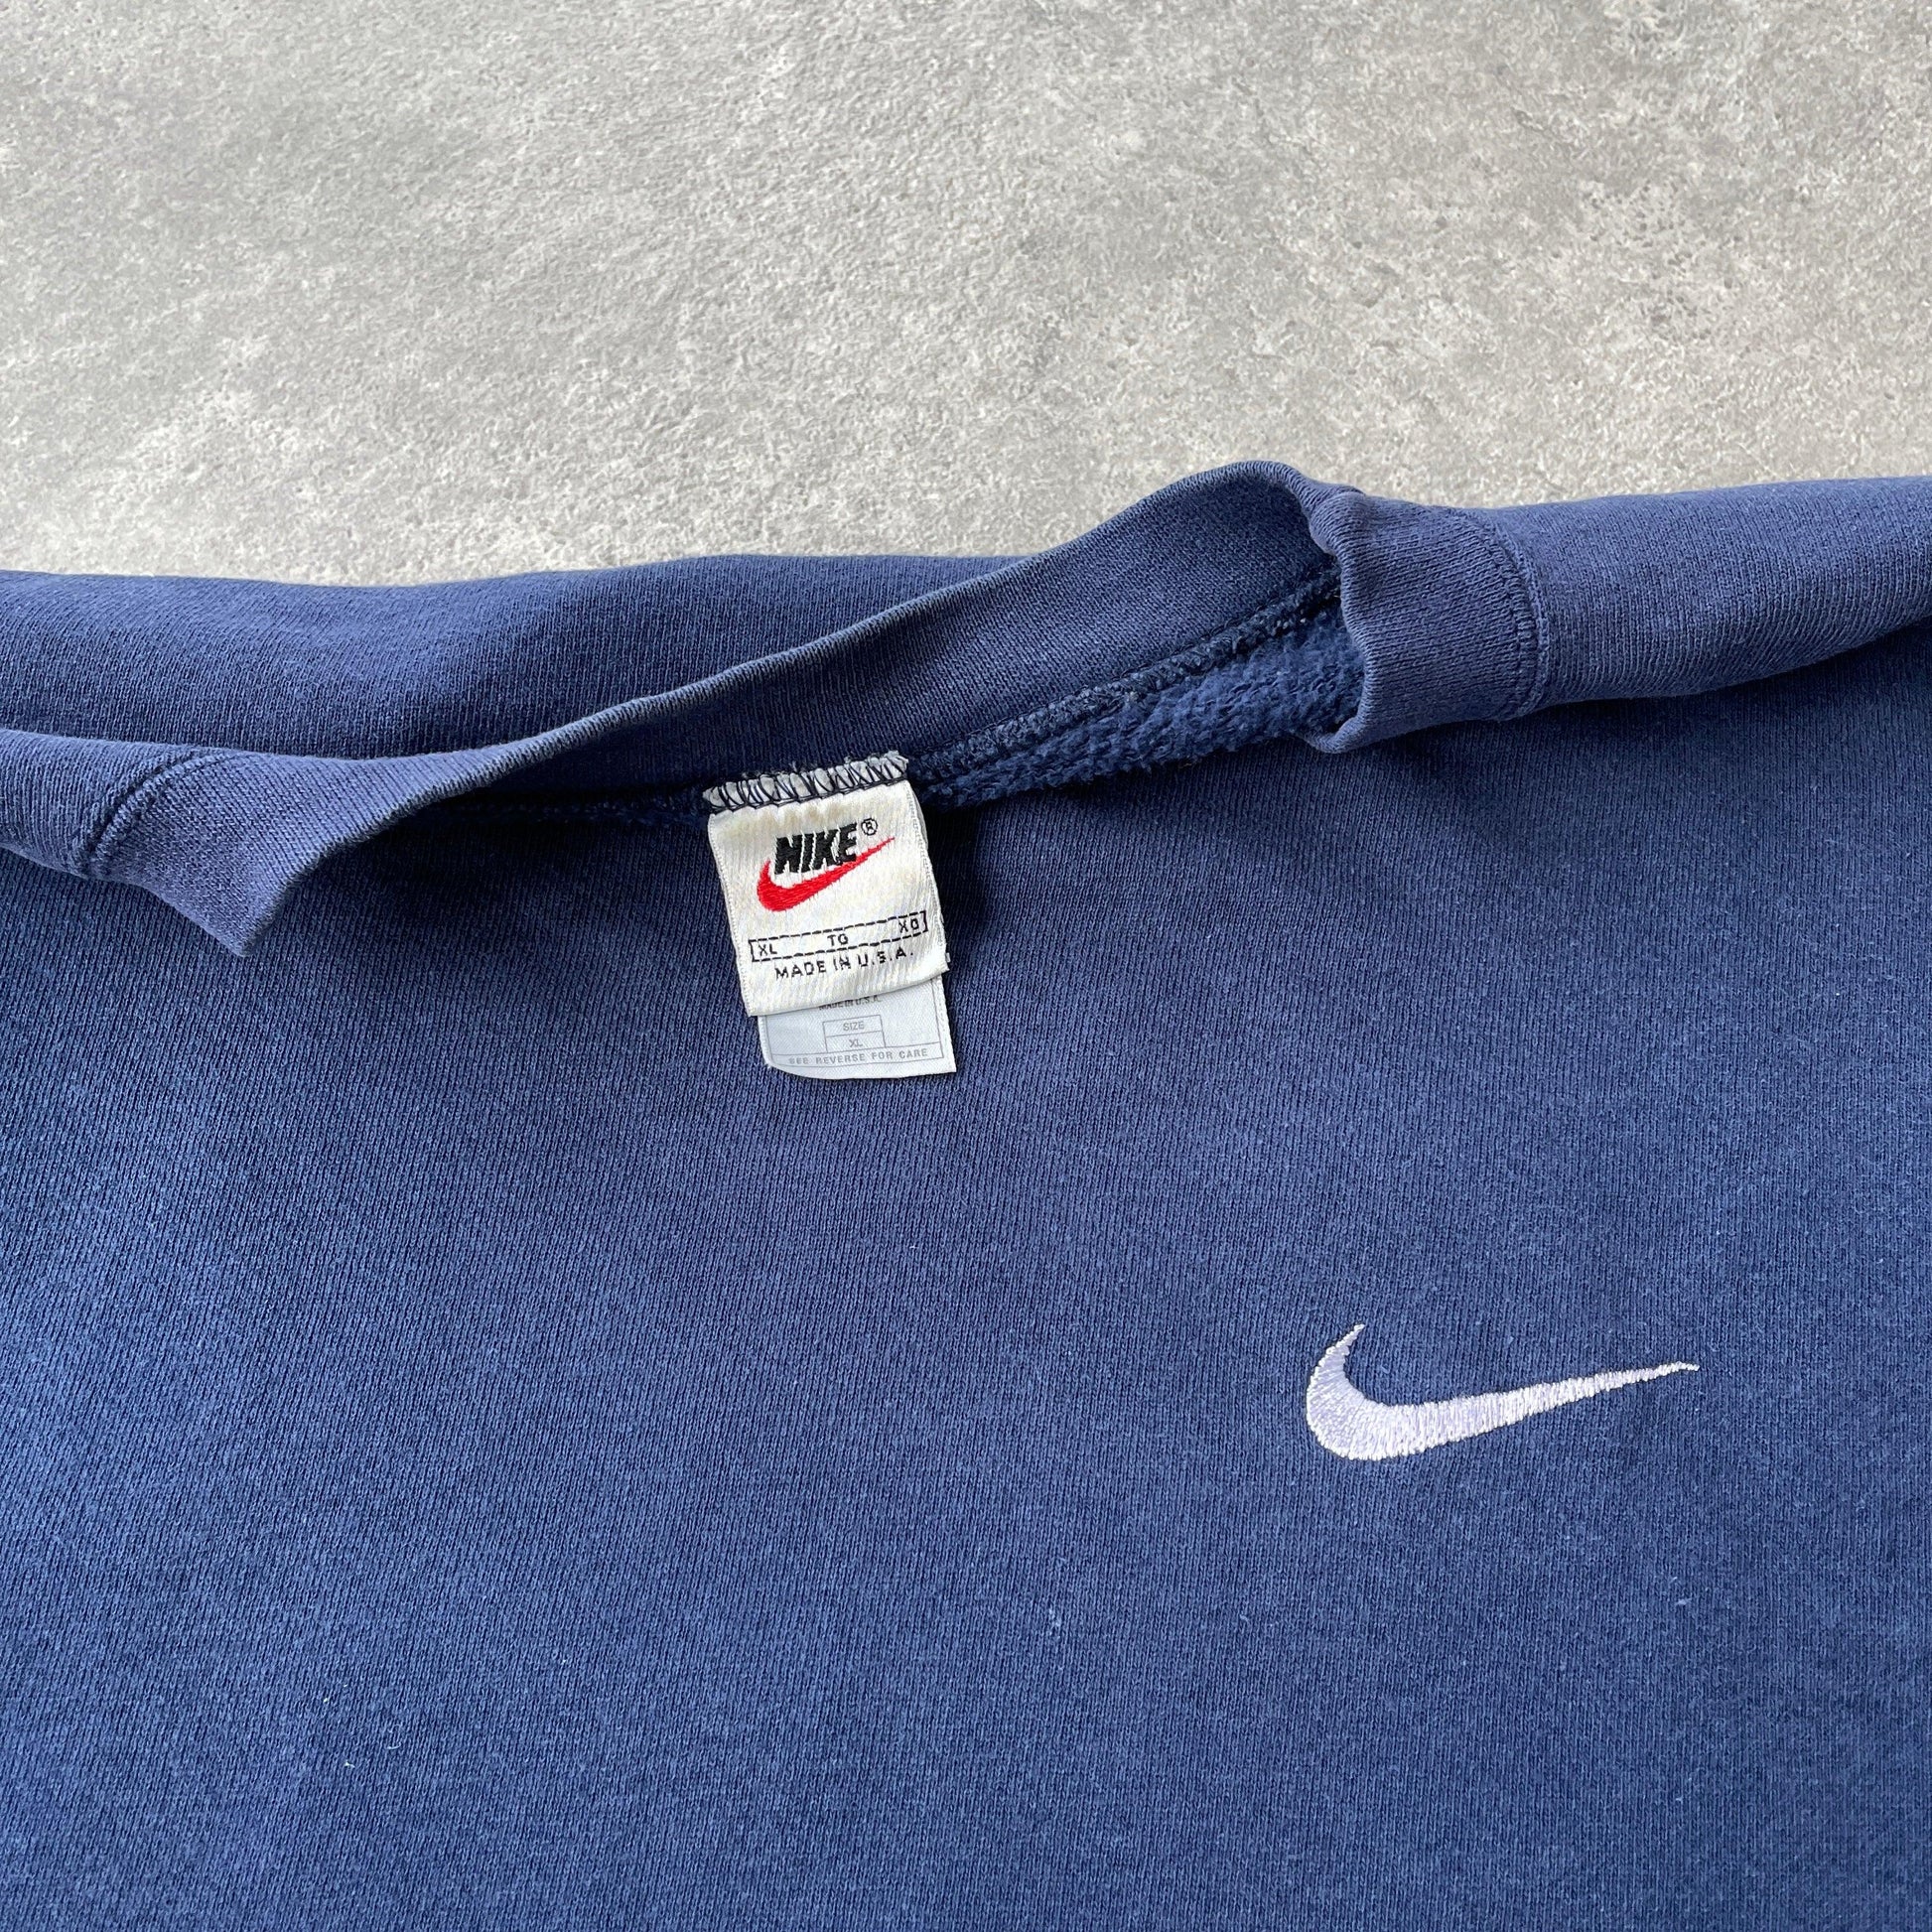 Nike 1990s heavyweight embroidered sweatshirt (XL) - Known Source